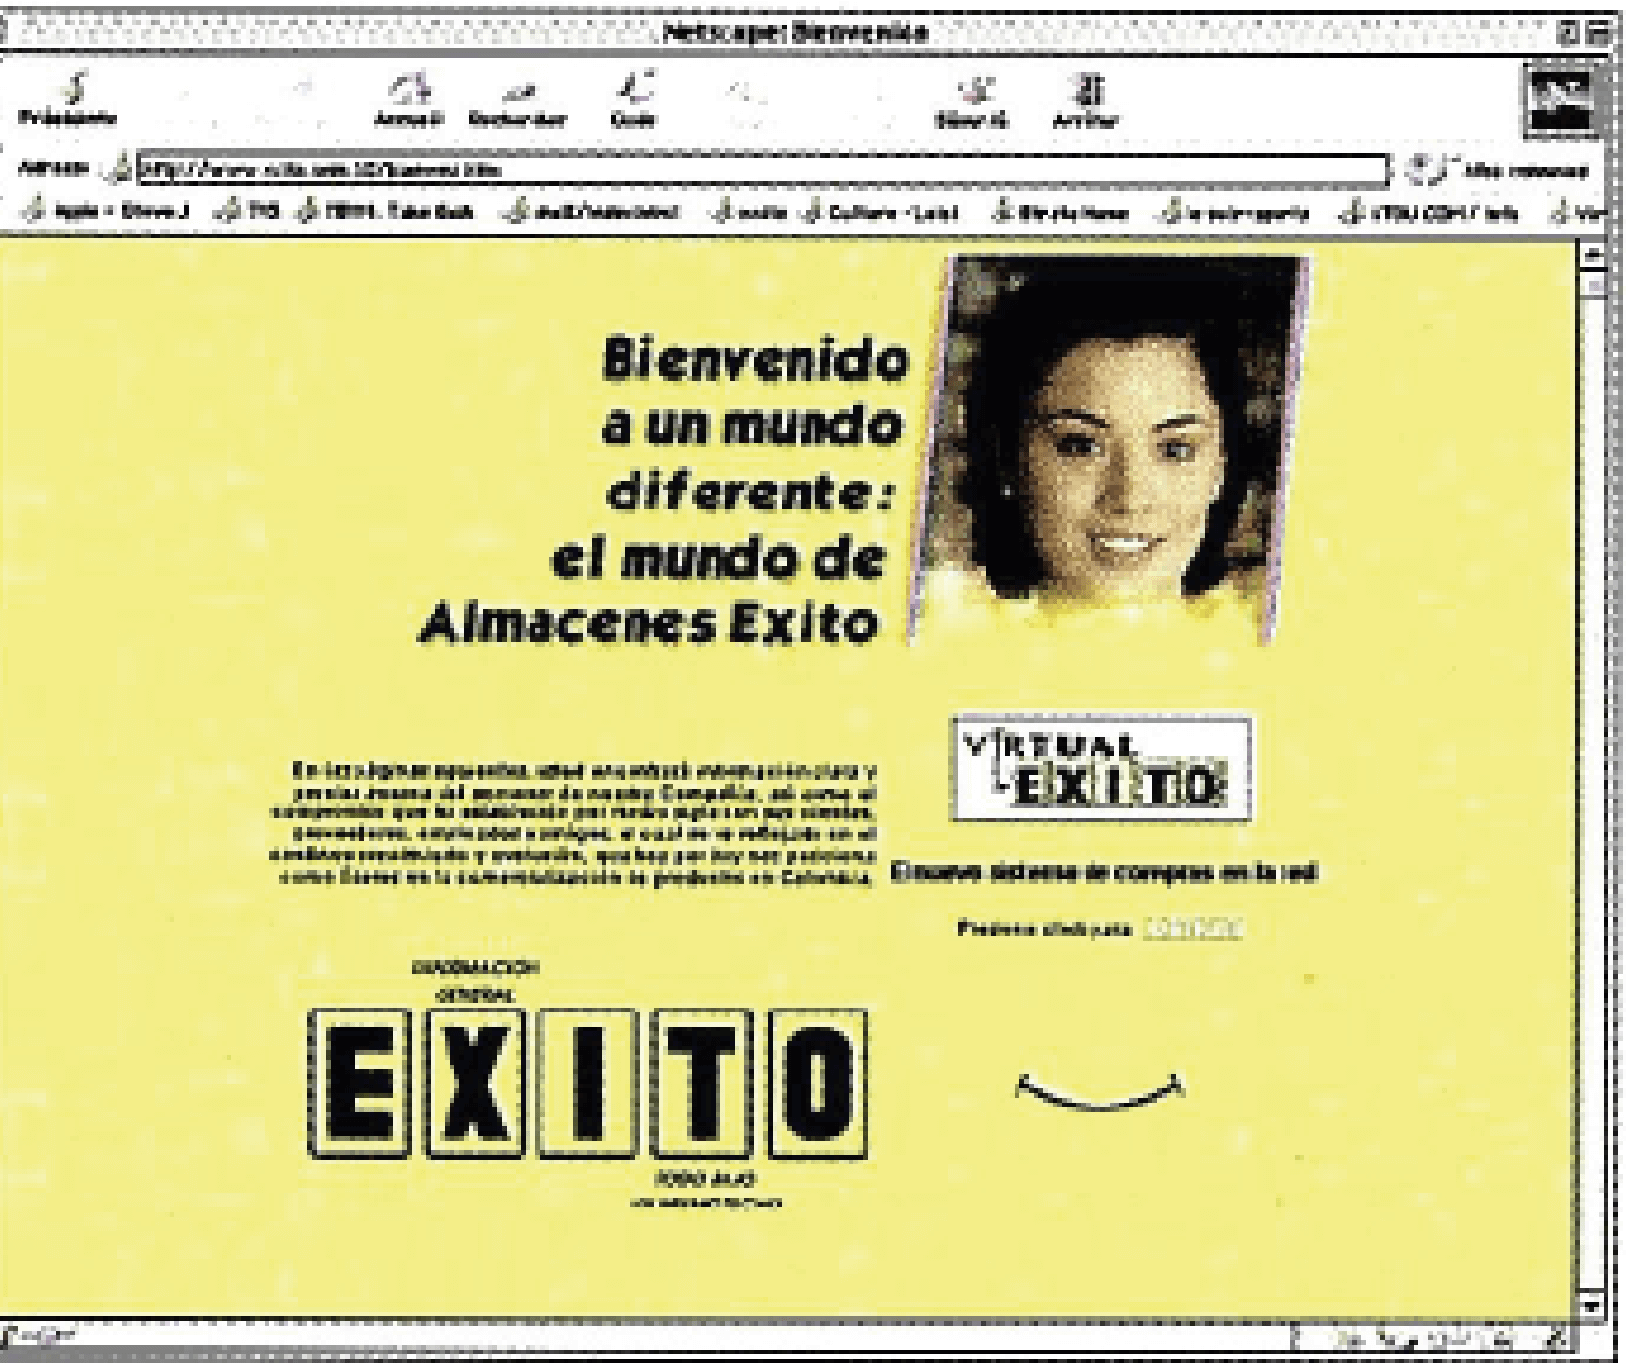 www.exito.co begins to operate